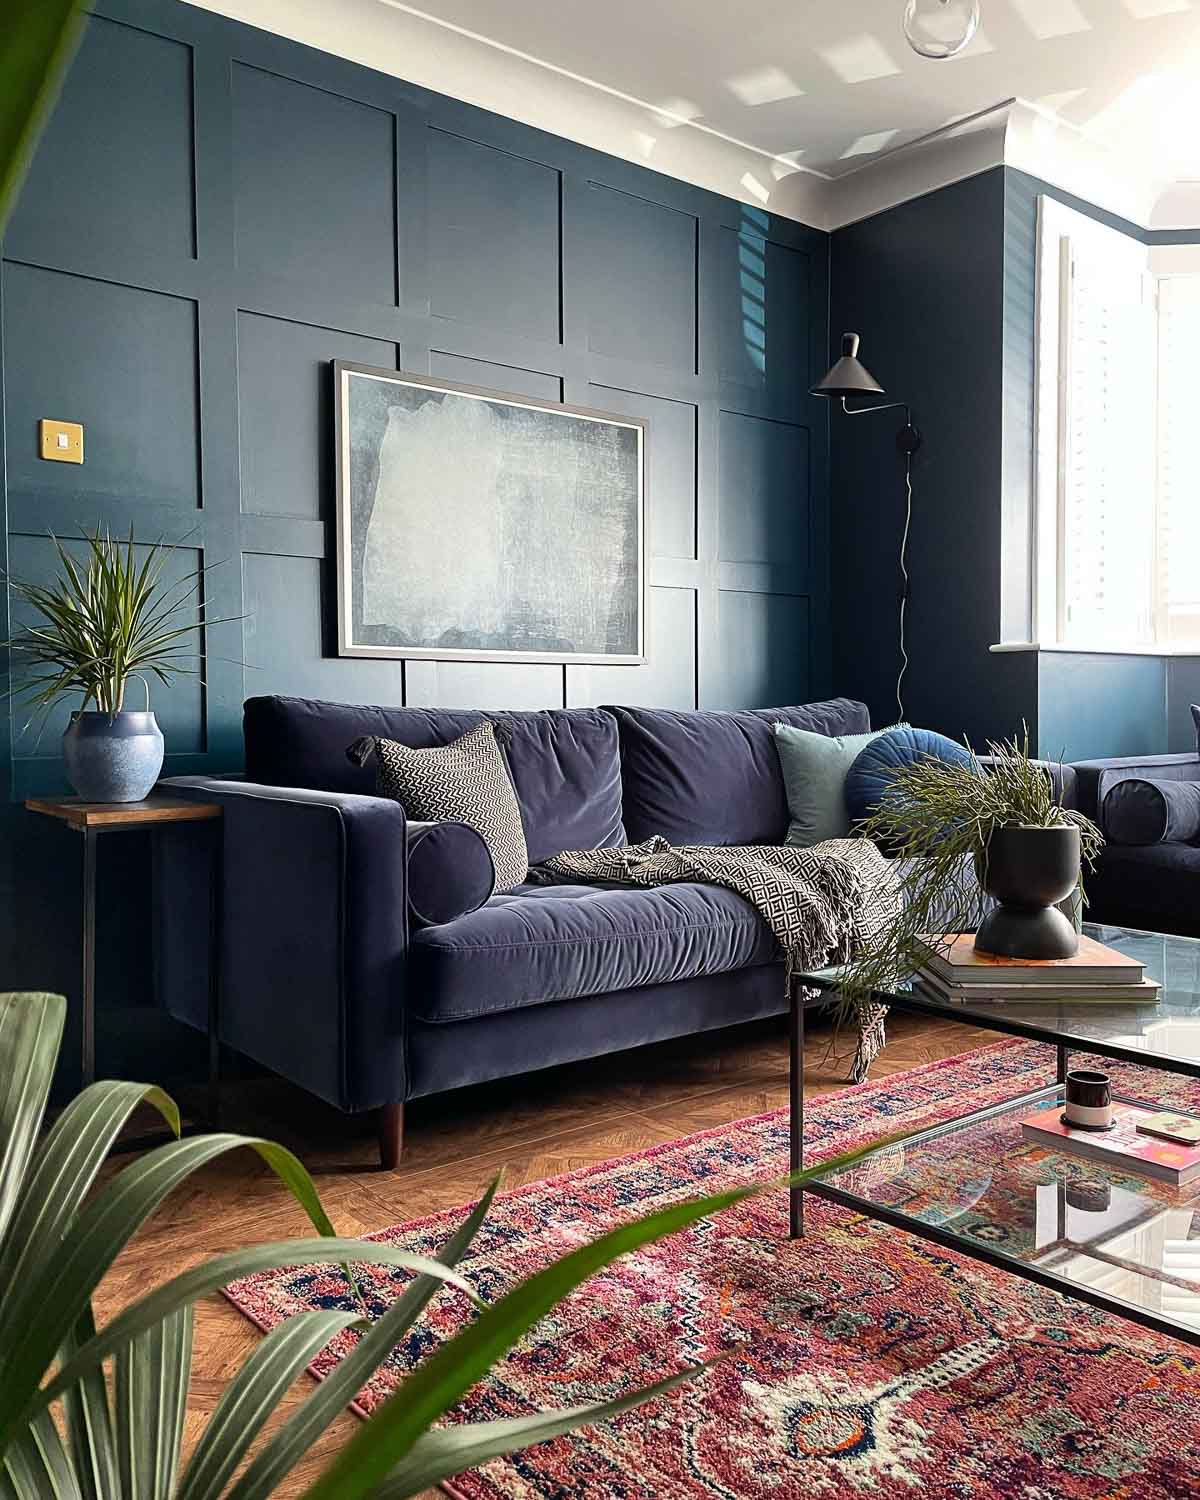 Living room with walls painted Farrow & Ball Hague Blue